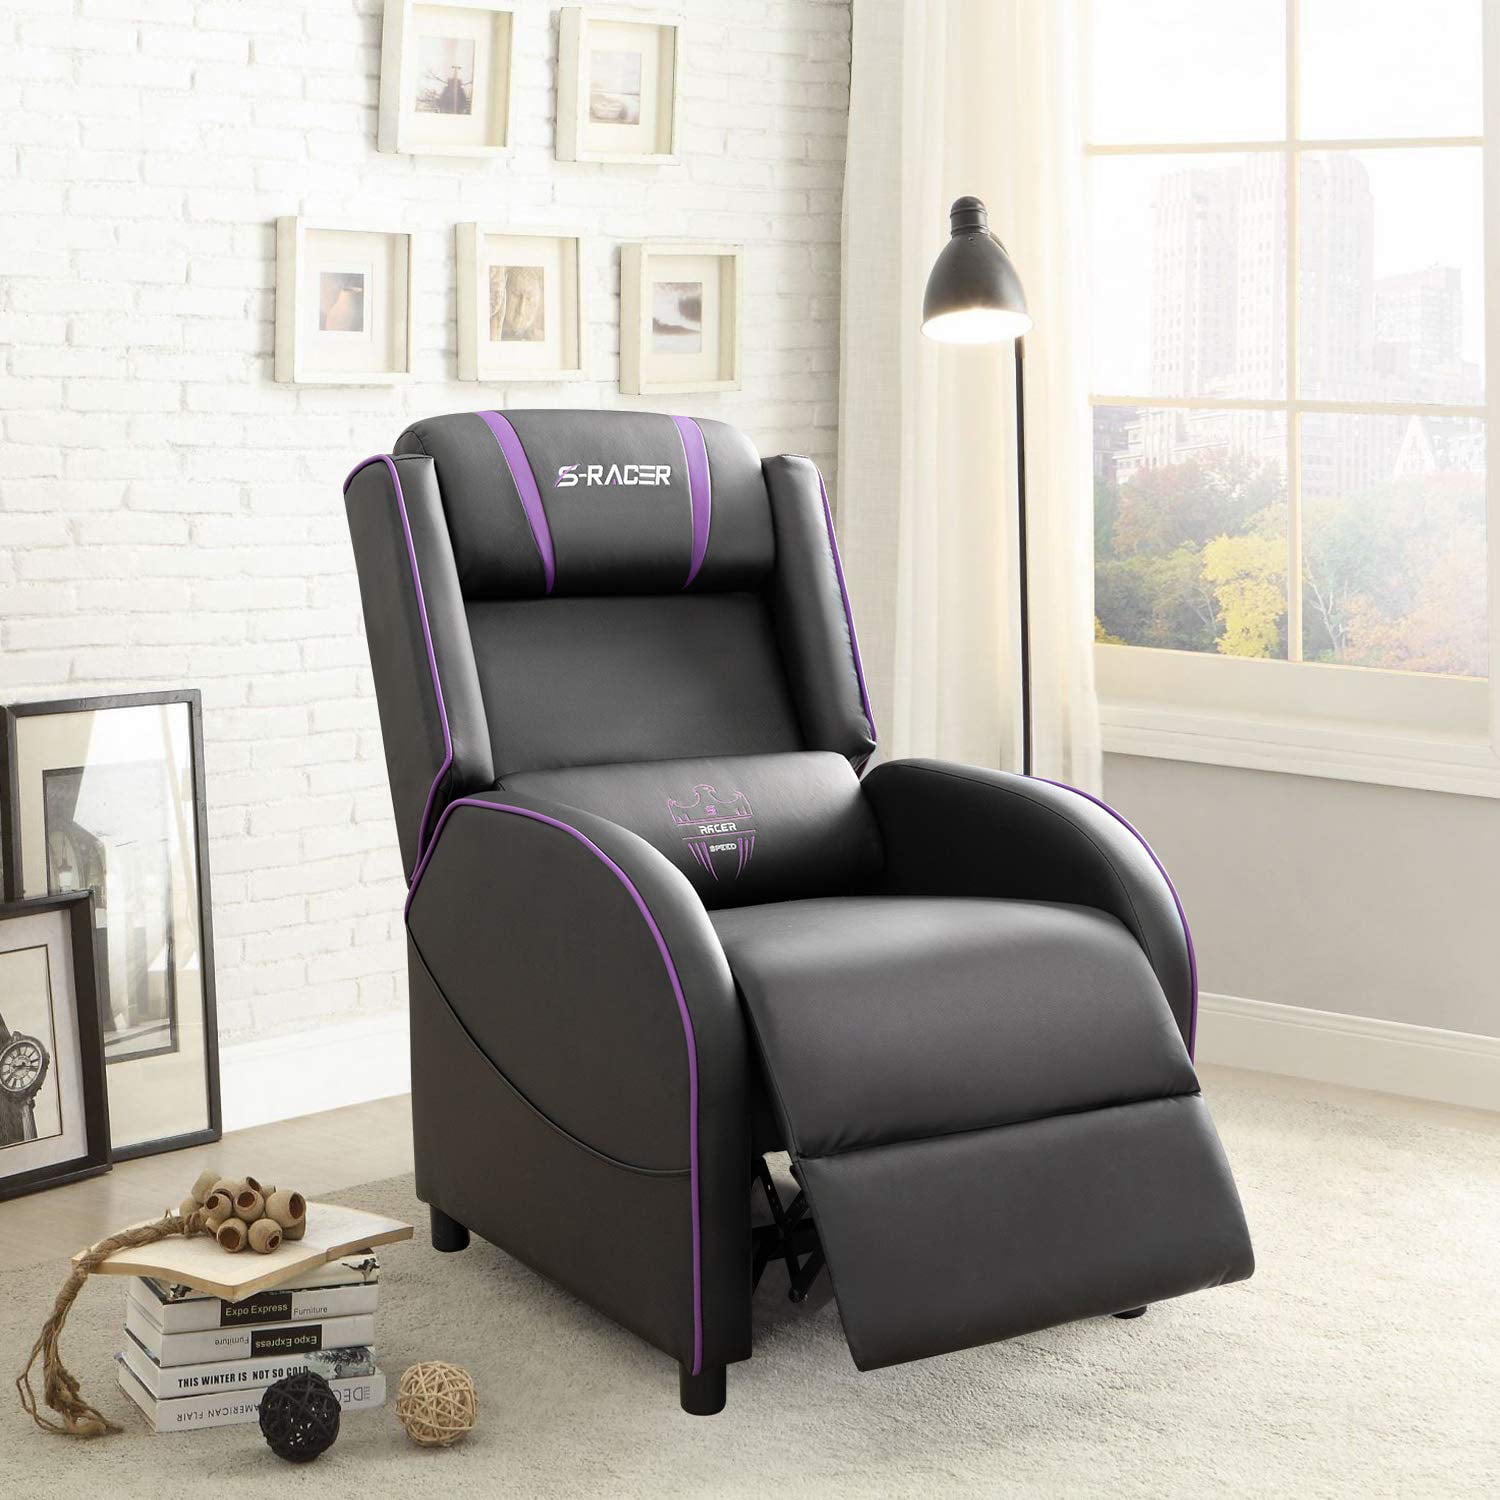 Homall Gaming Recliner Chair with PU Leather, Black/Purple - Walmart.com